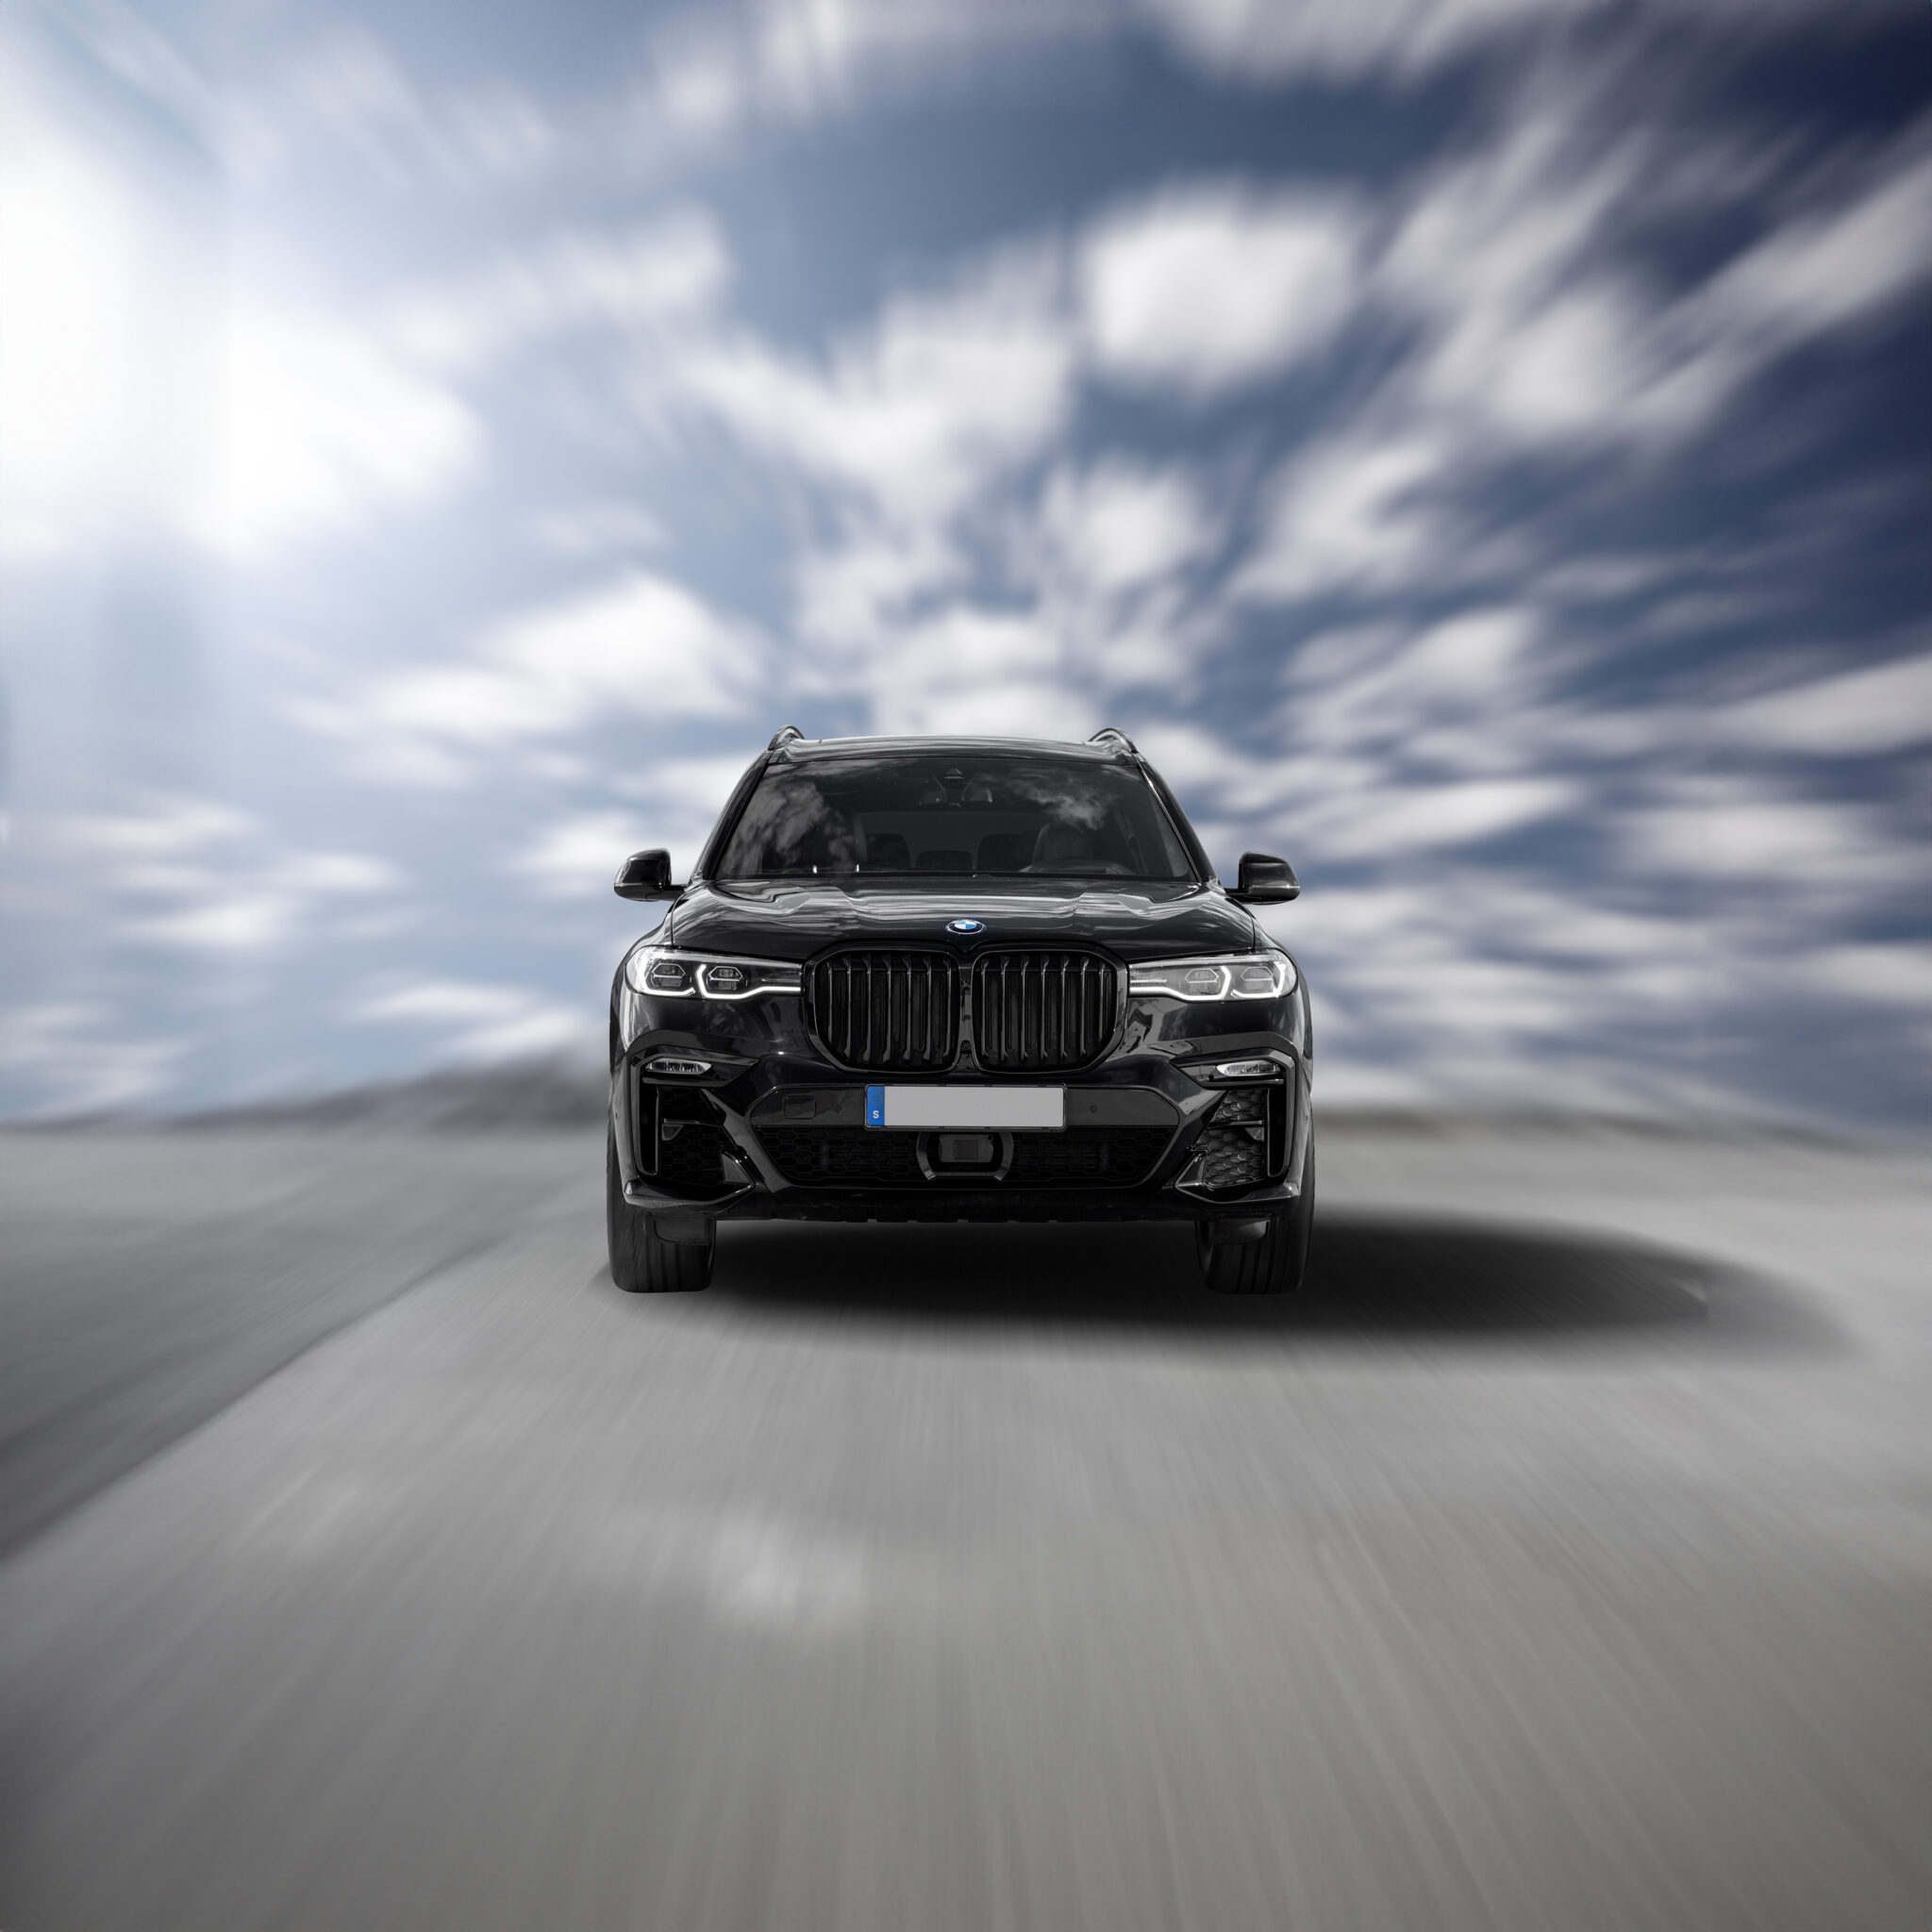 BMW X7 front picture